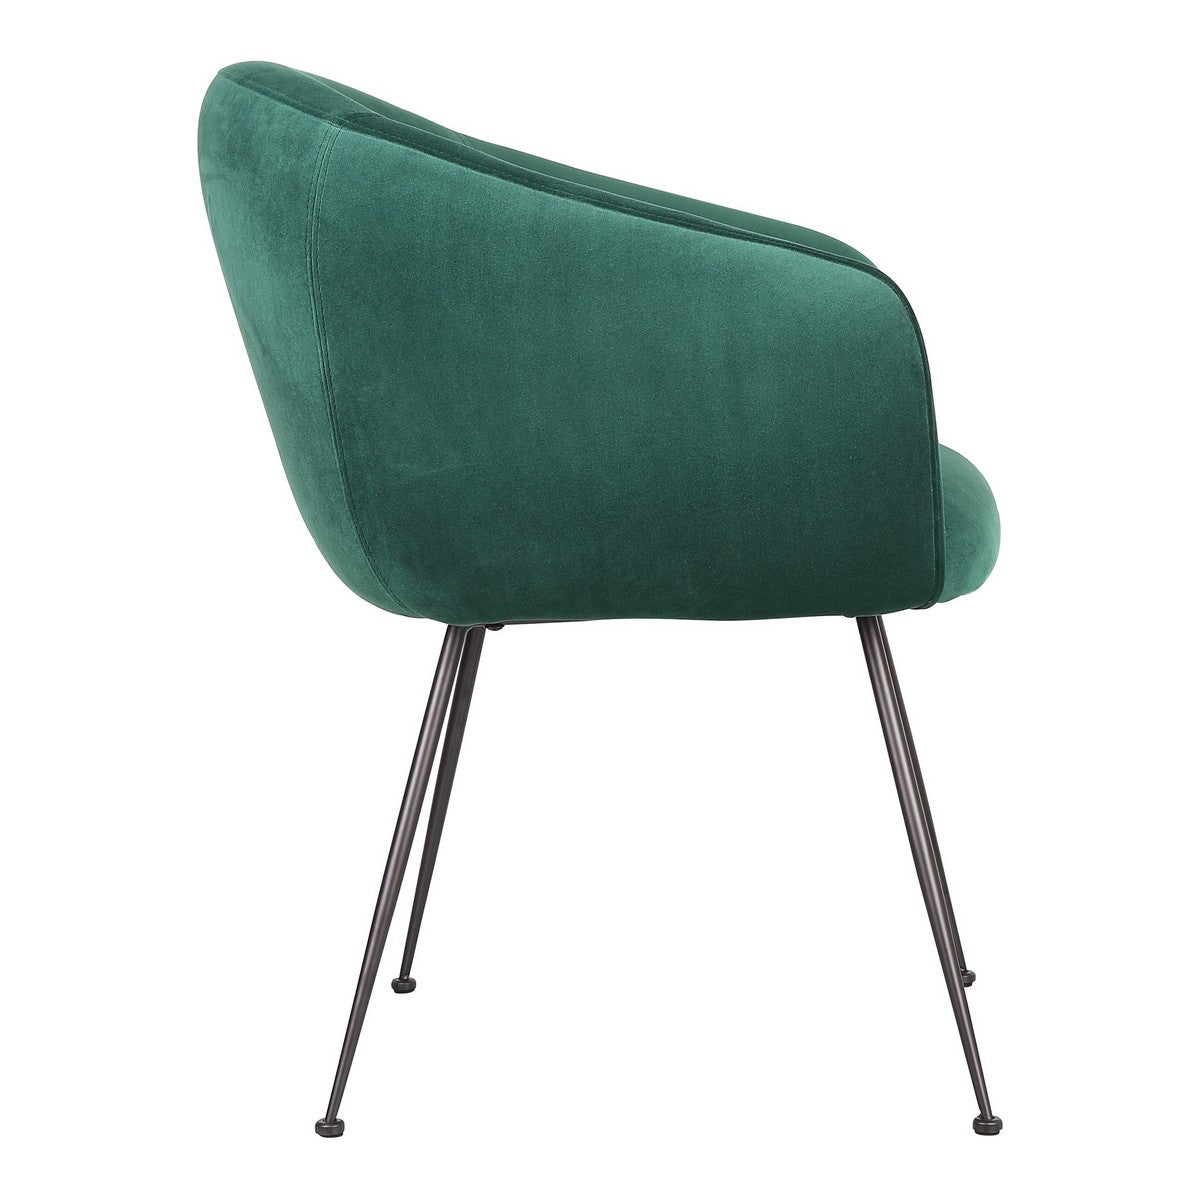 Moe's Home Collection Clover Dining Chair Green - EH-1108-16